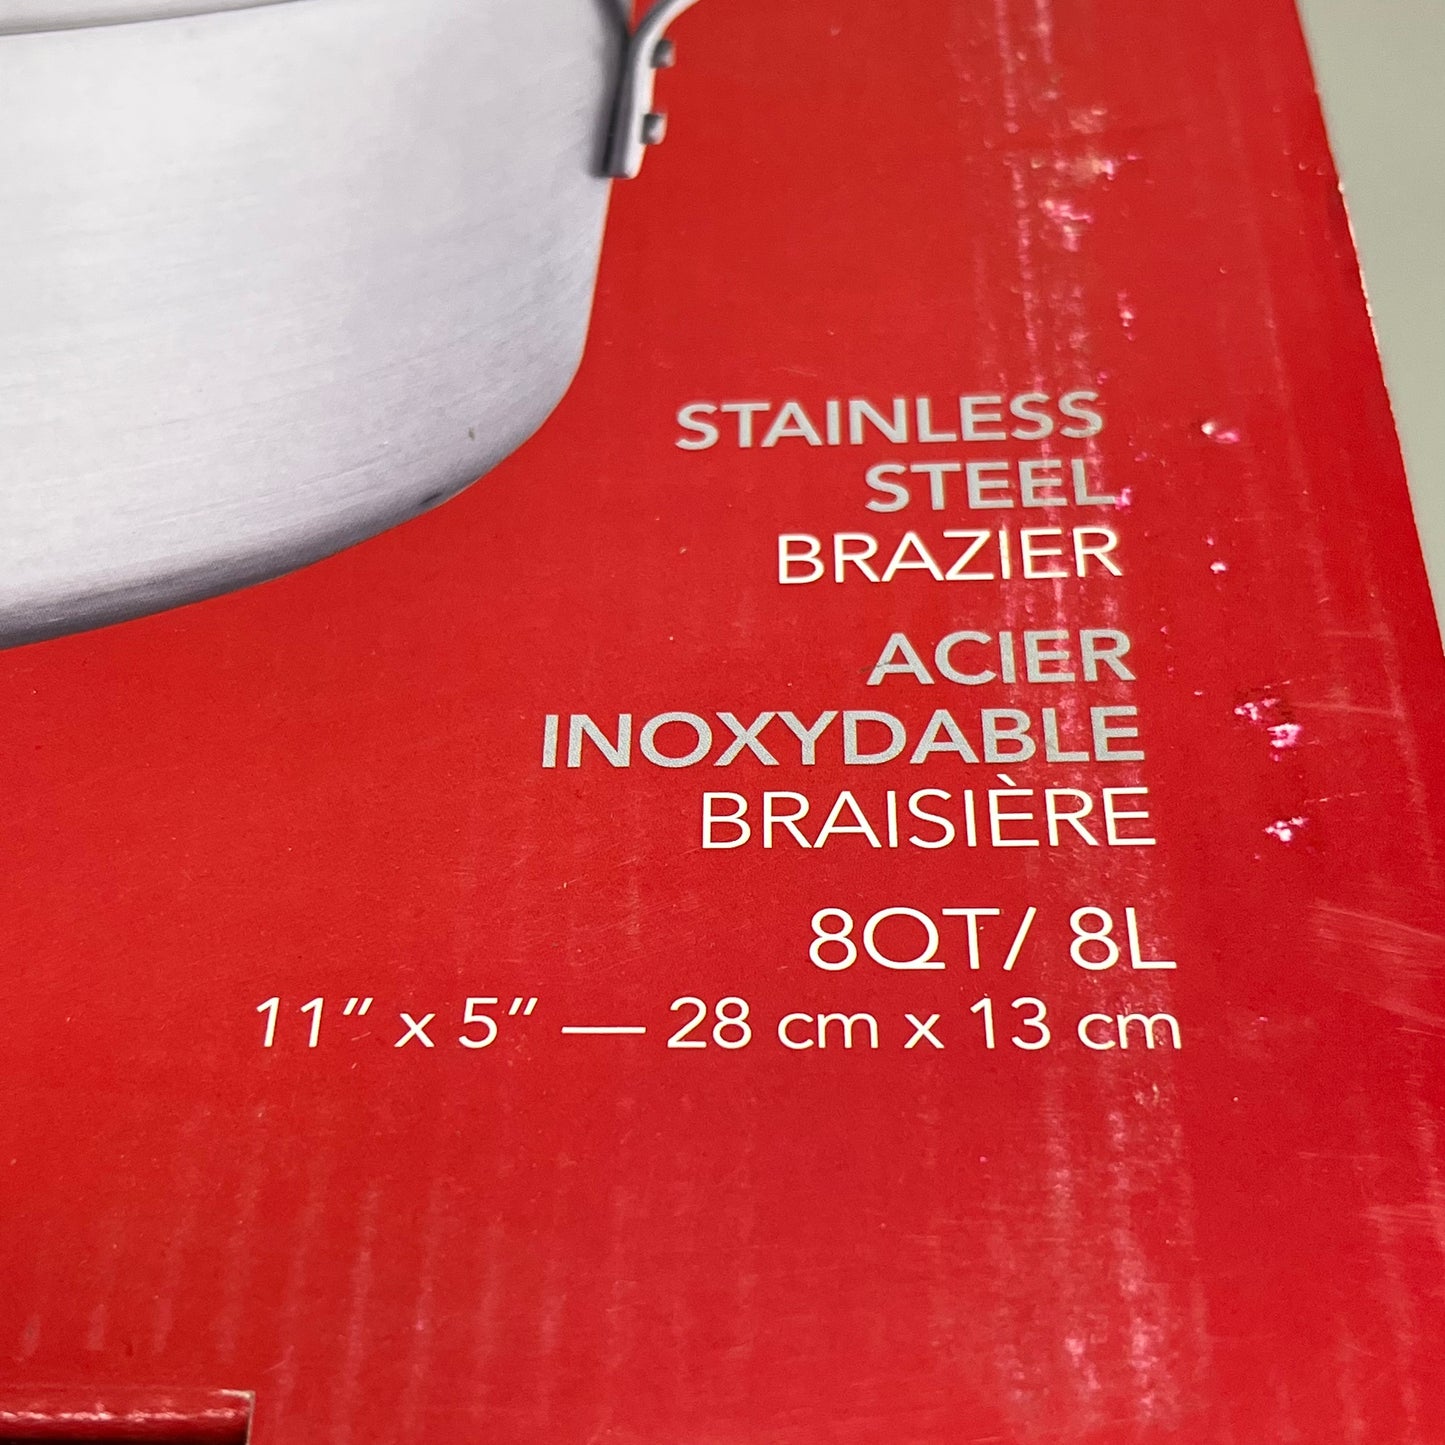 BROWNE Thermalloy Stainless Steel Brazier 8 qts 5724009 (New)